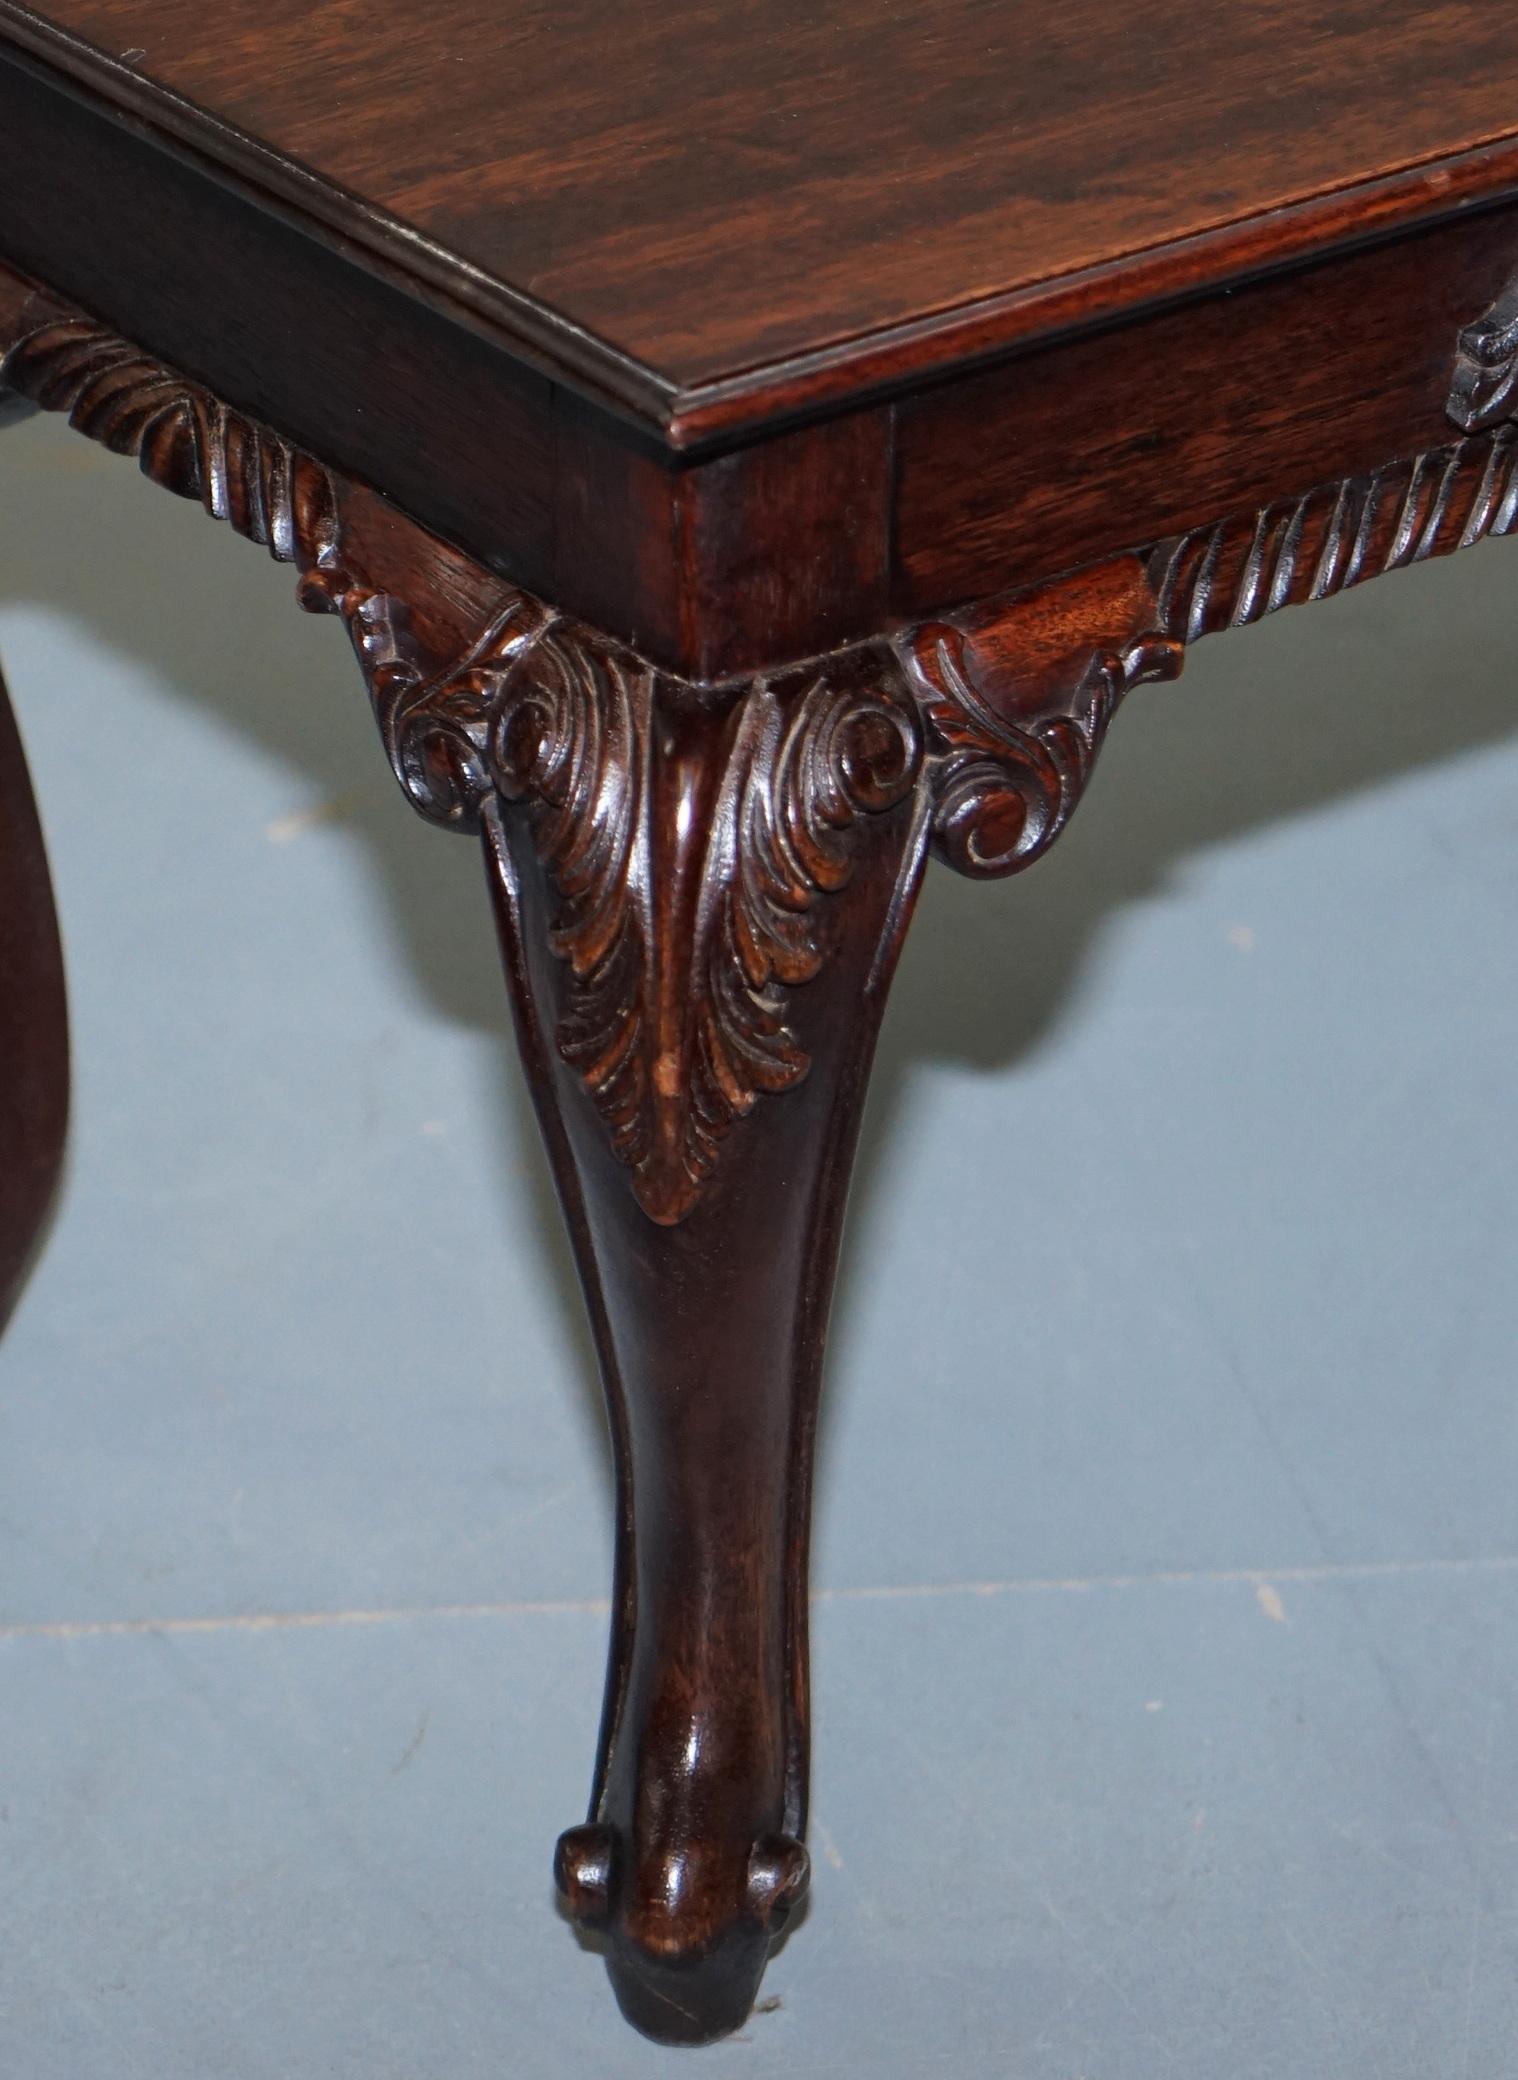 Modern Nice Small Vintage Carved Hardwood Coffee Table with Irish Acanthus Leaf Details